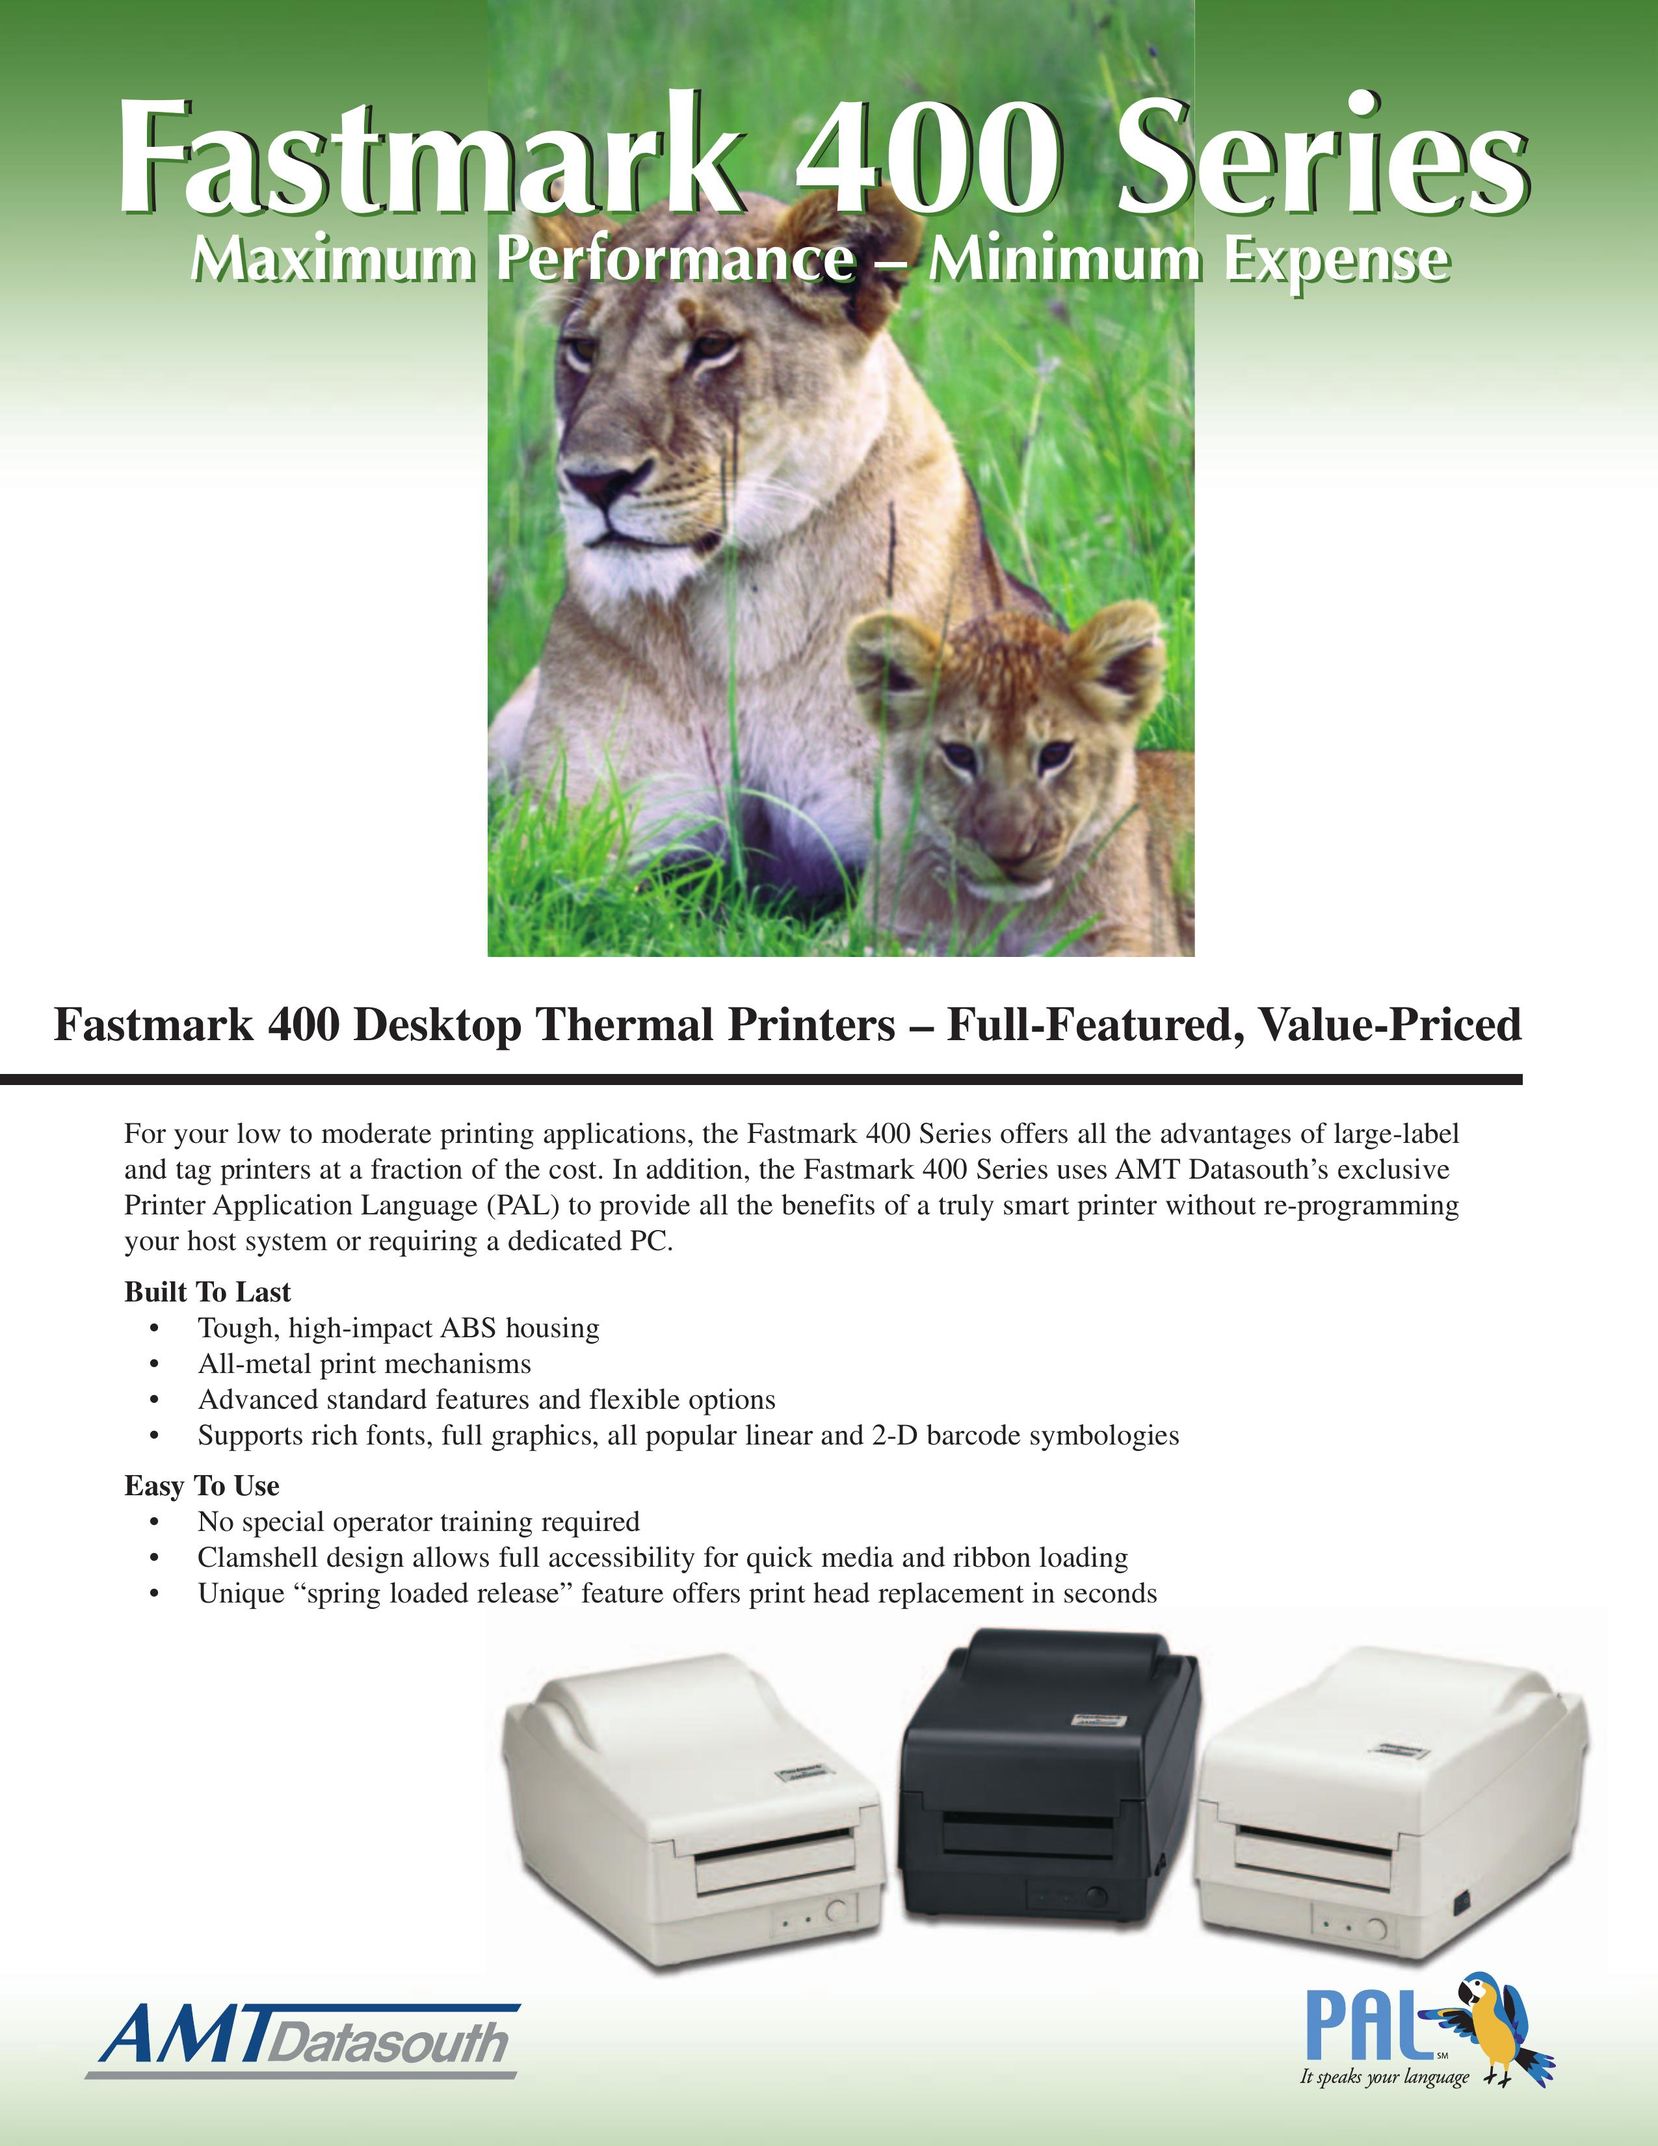 AMT Datasouth FM402DT Printer User Manual (Page 1)